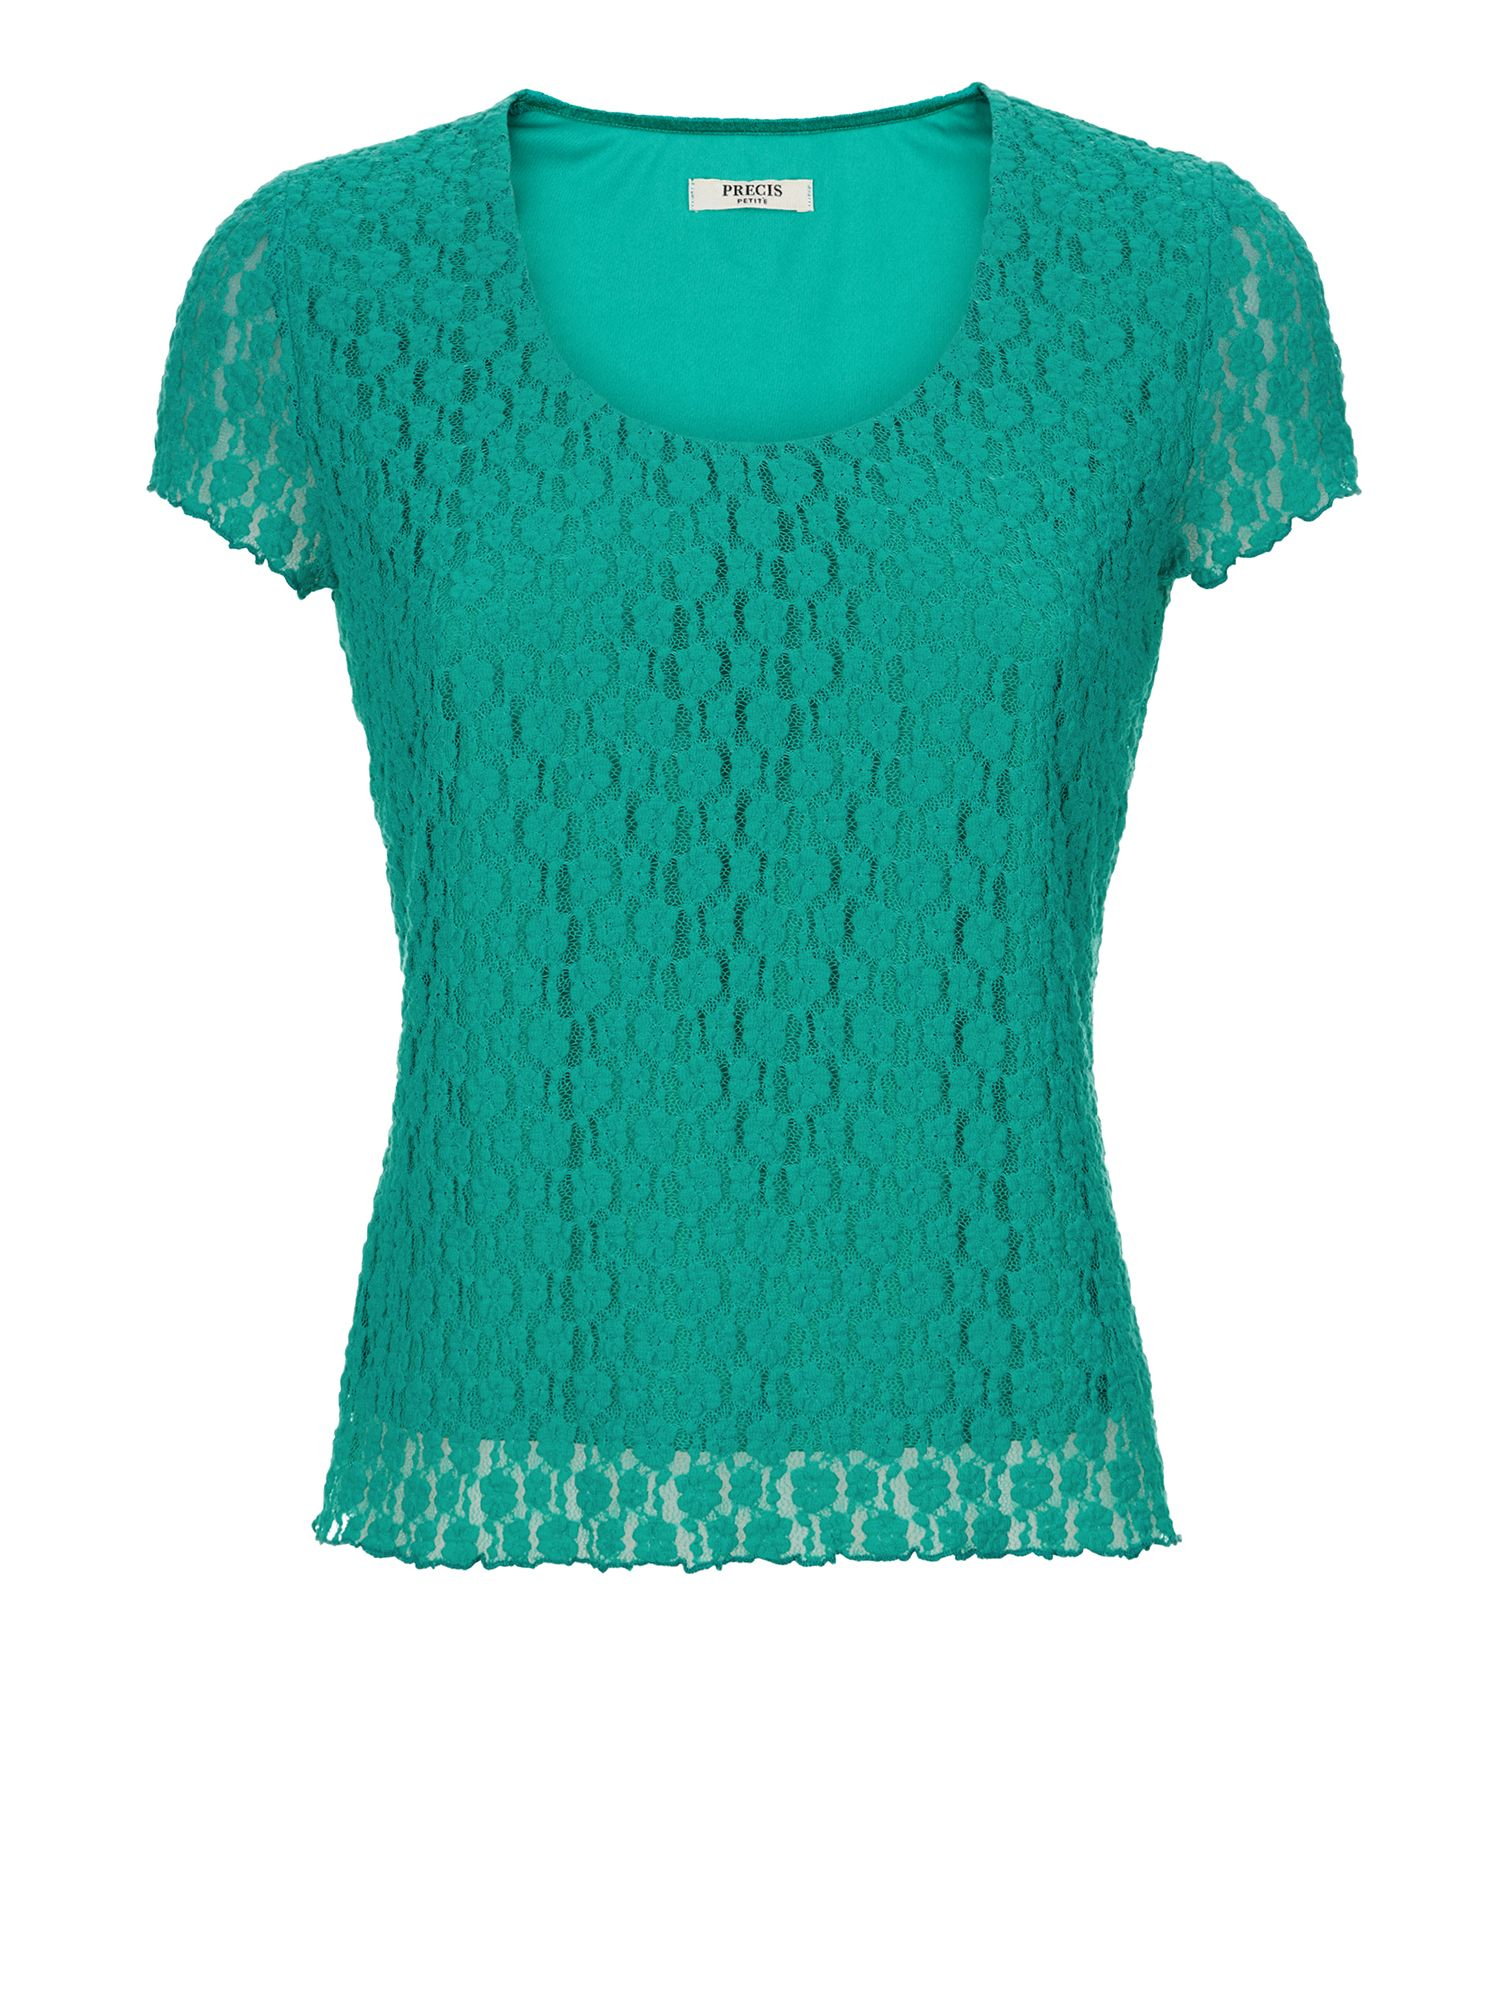 Precis Petite Floral Lace Top in Green (Jade) | Lyst